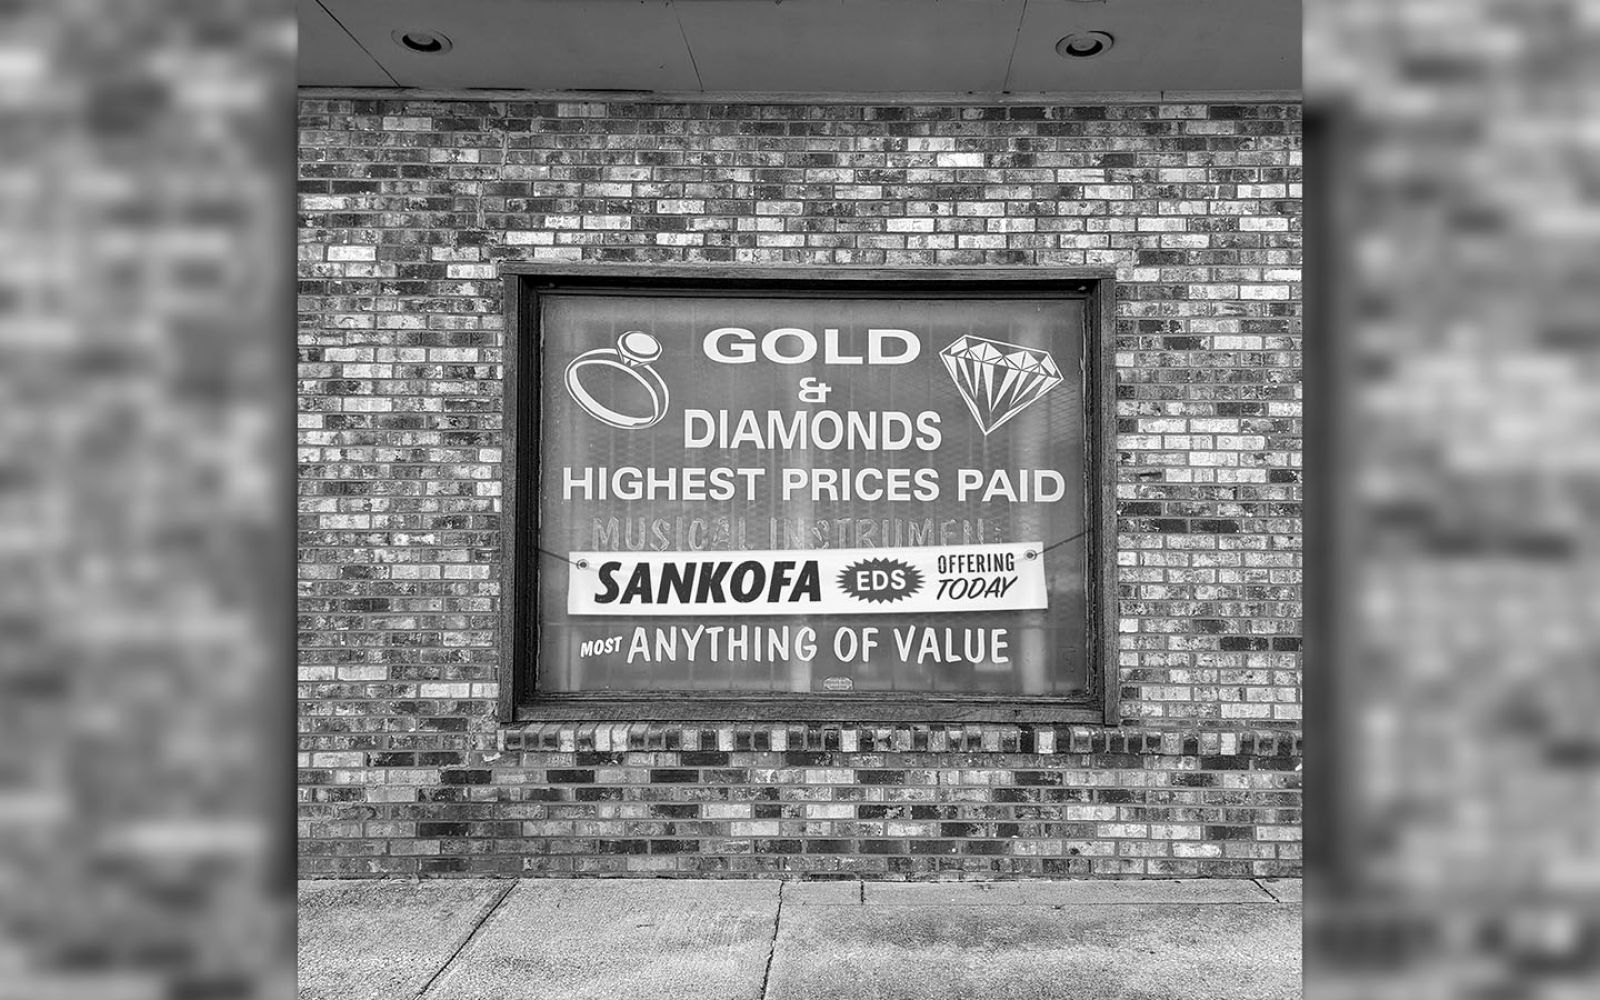 Sankofa delivers another stellar album with "Most Anything of Value."